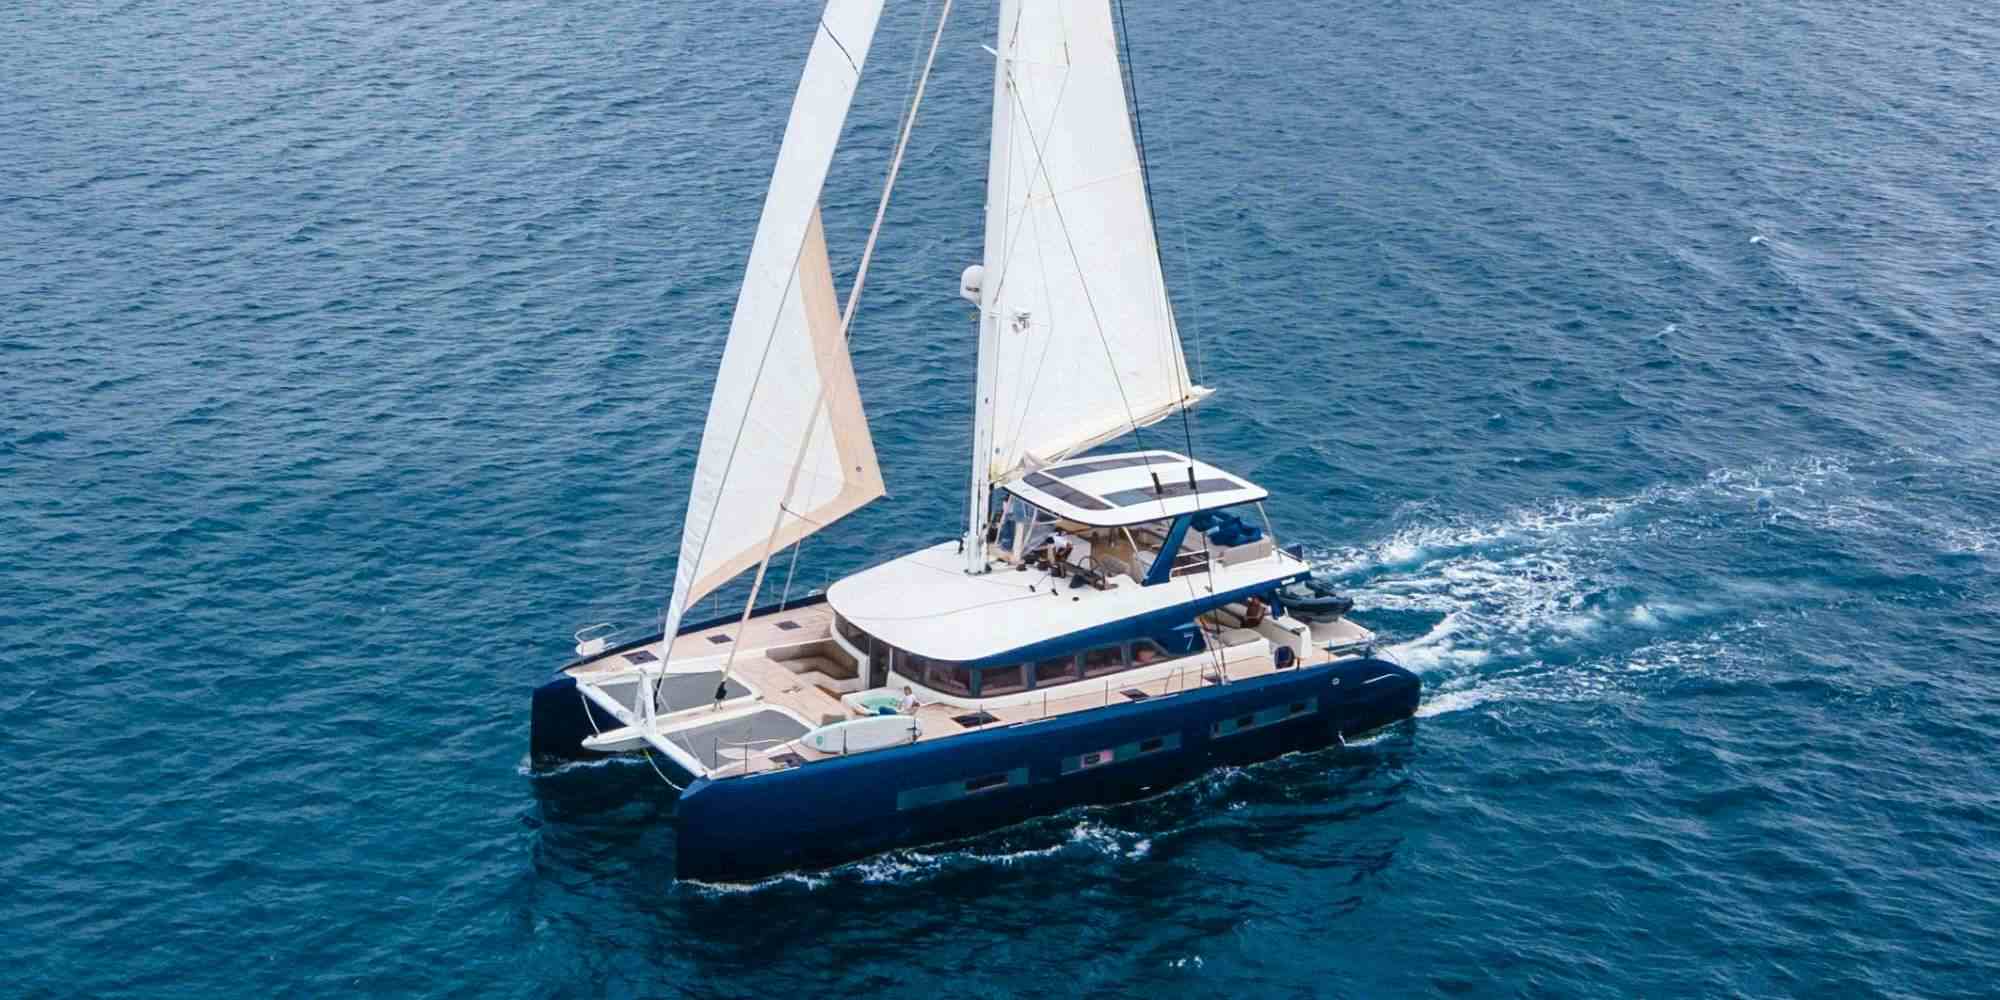 MANE ET NOCTE - Yacht Charter Malaysia & Boat hire in Indian Ocean & SE Asia 1